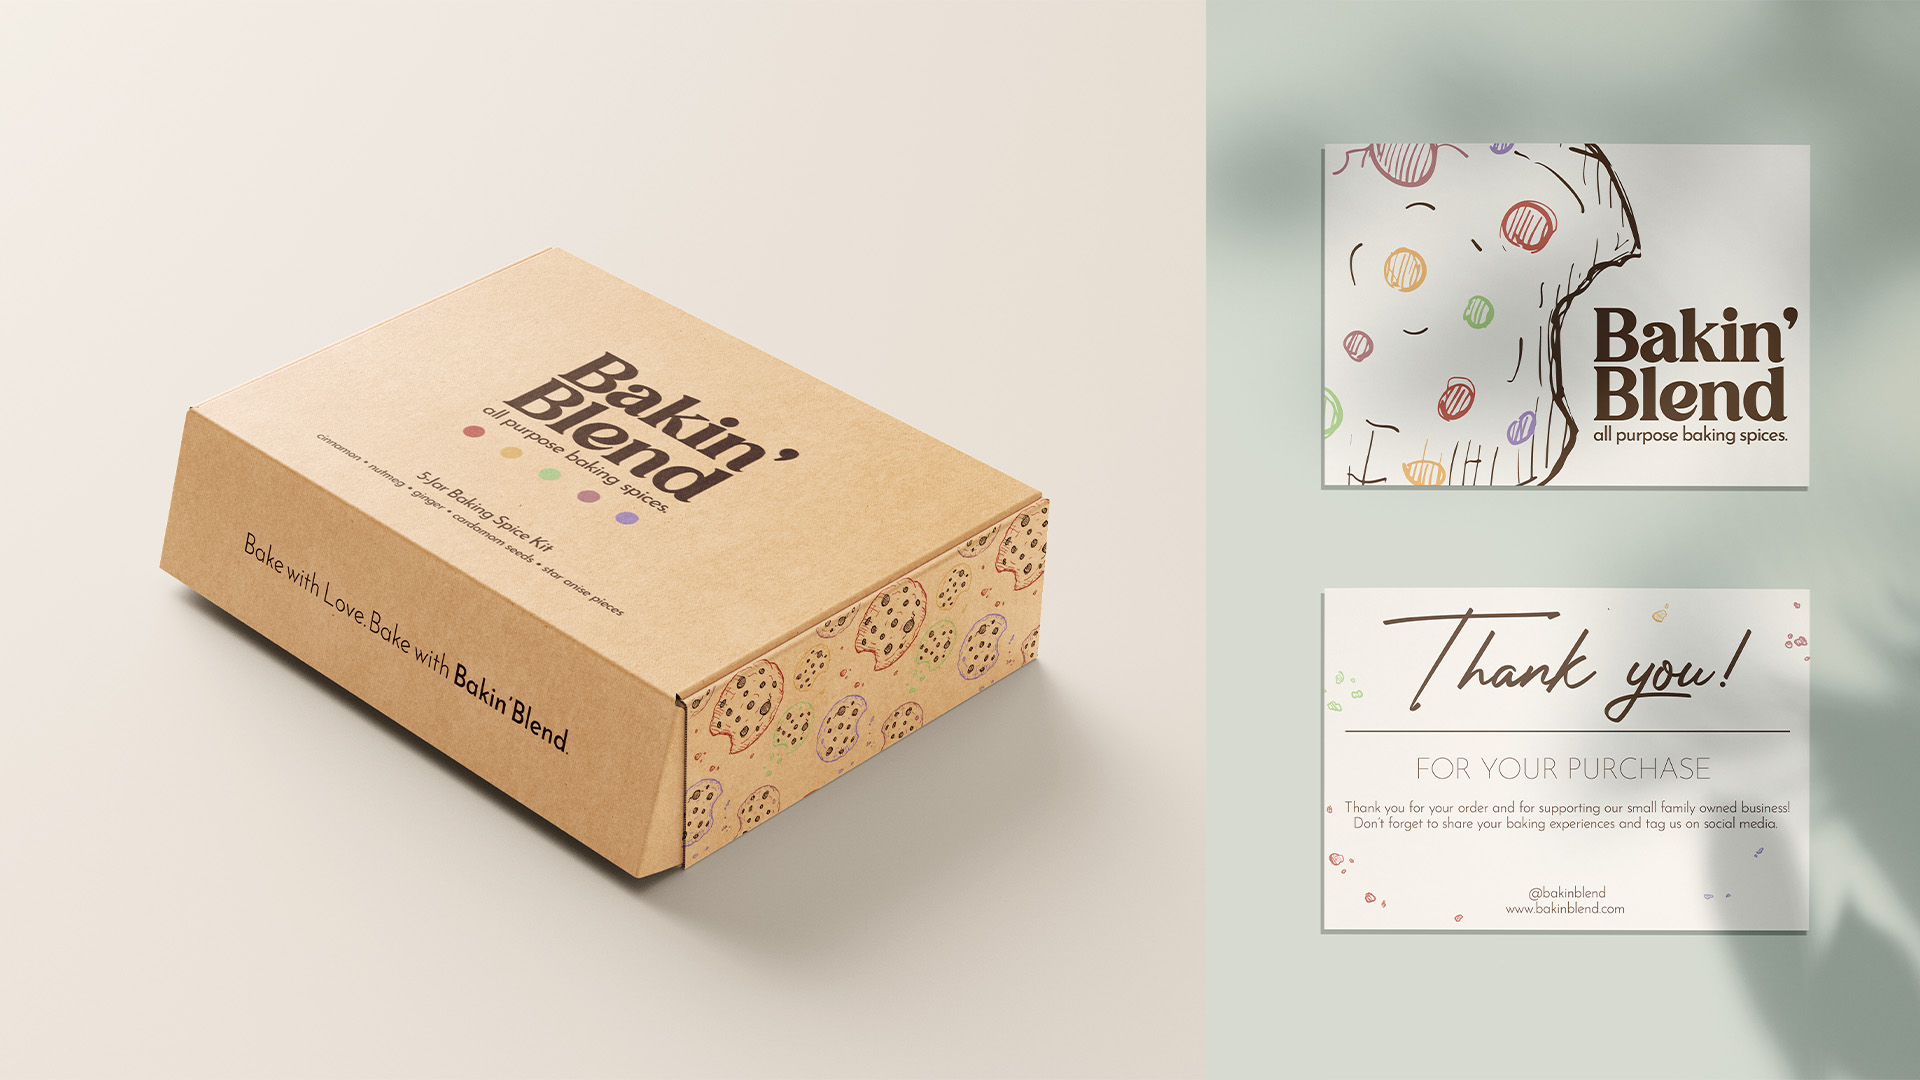 Bakin' Blend Mailer / "Bakin' Blend Mailer," Packaging Design and Advertising, print size varies, 2023. Packing mailer and Thank You card for a 5-piece spice kit from the made-up brand Bakin' Blend. Part of a group project with Emily Molander and EJ Weathers.